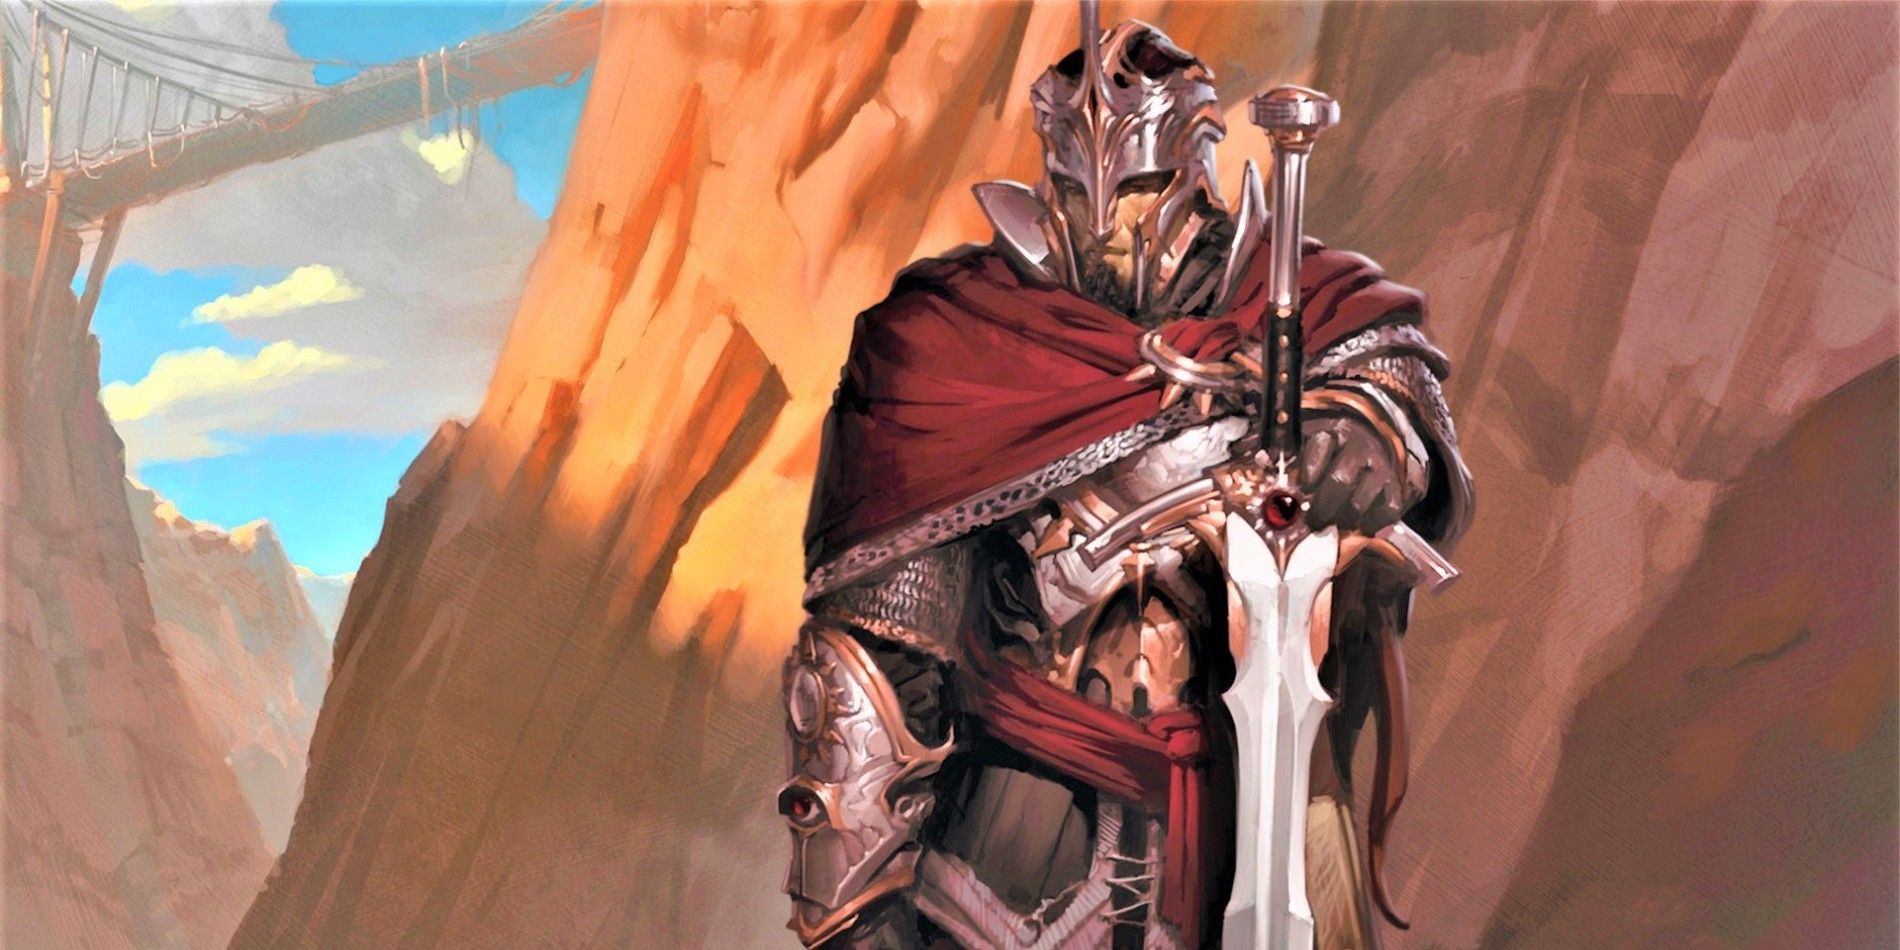 Fighters in Dungeons & Dragons can be as dynamic as they are powerful.